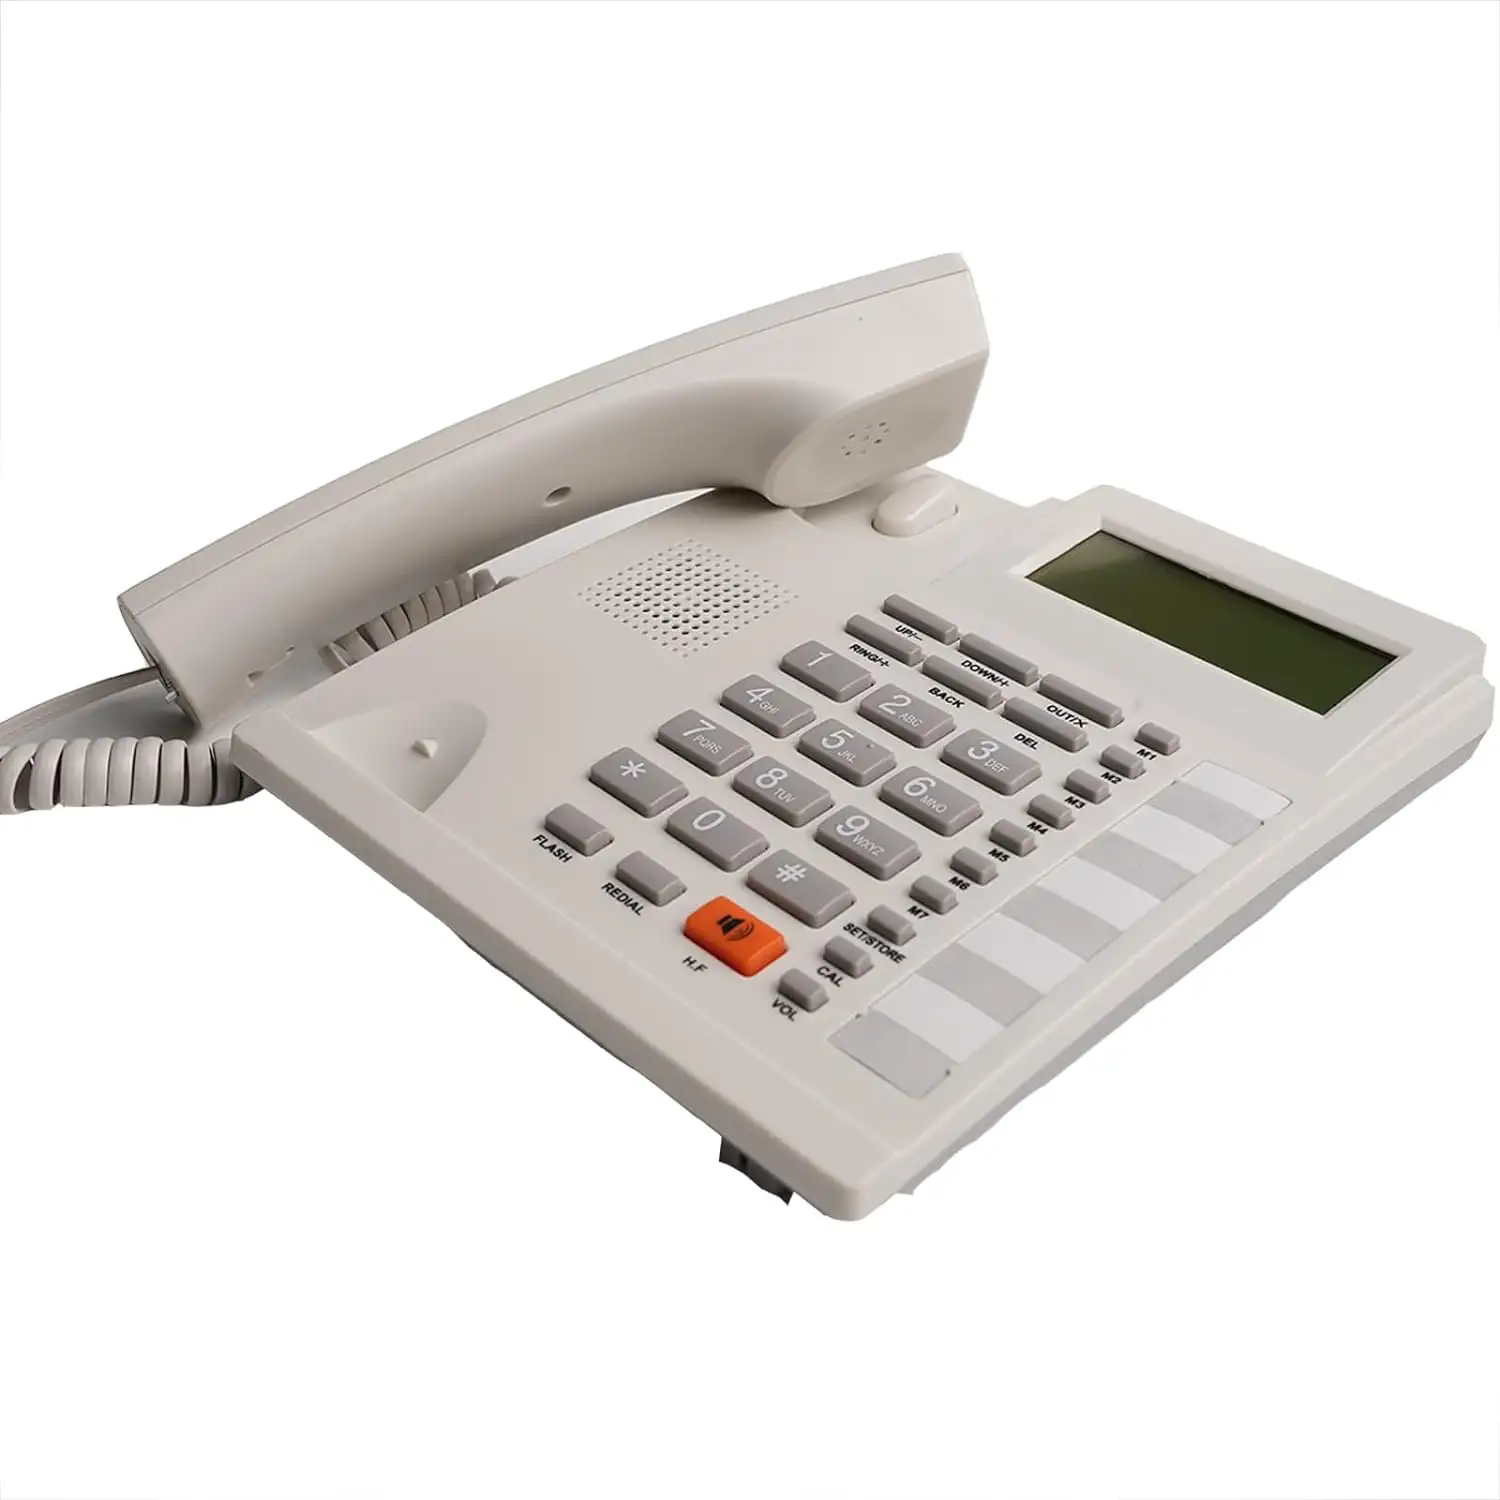 Dual Interface Wired Telephone Big Button Landline Corded Phones with Number Display Suitable for Office, Reception, Home, Hotel